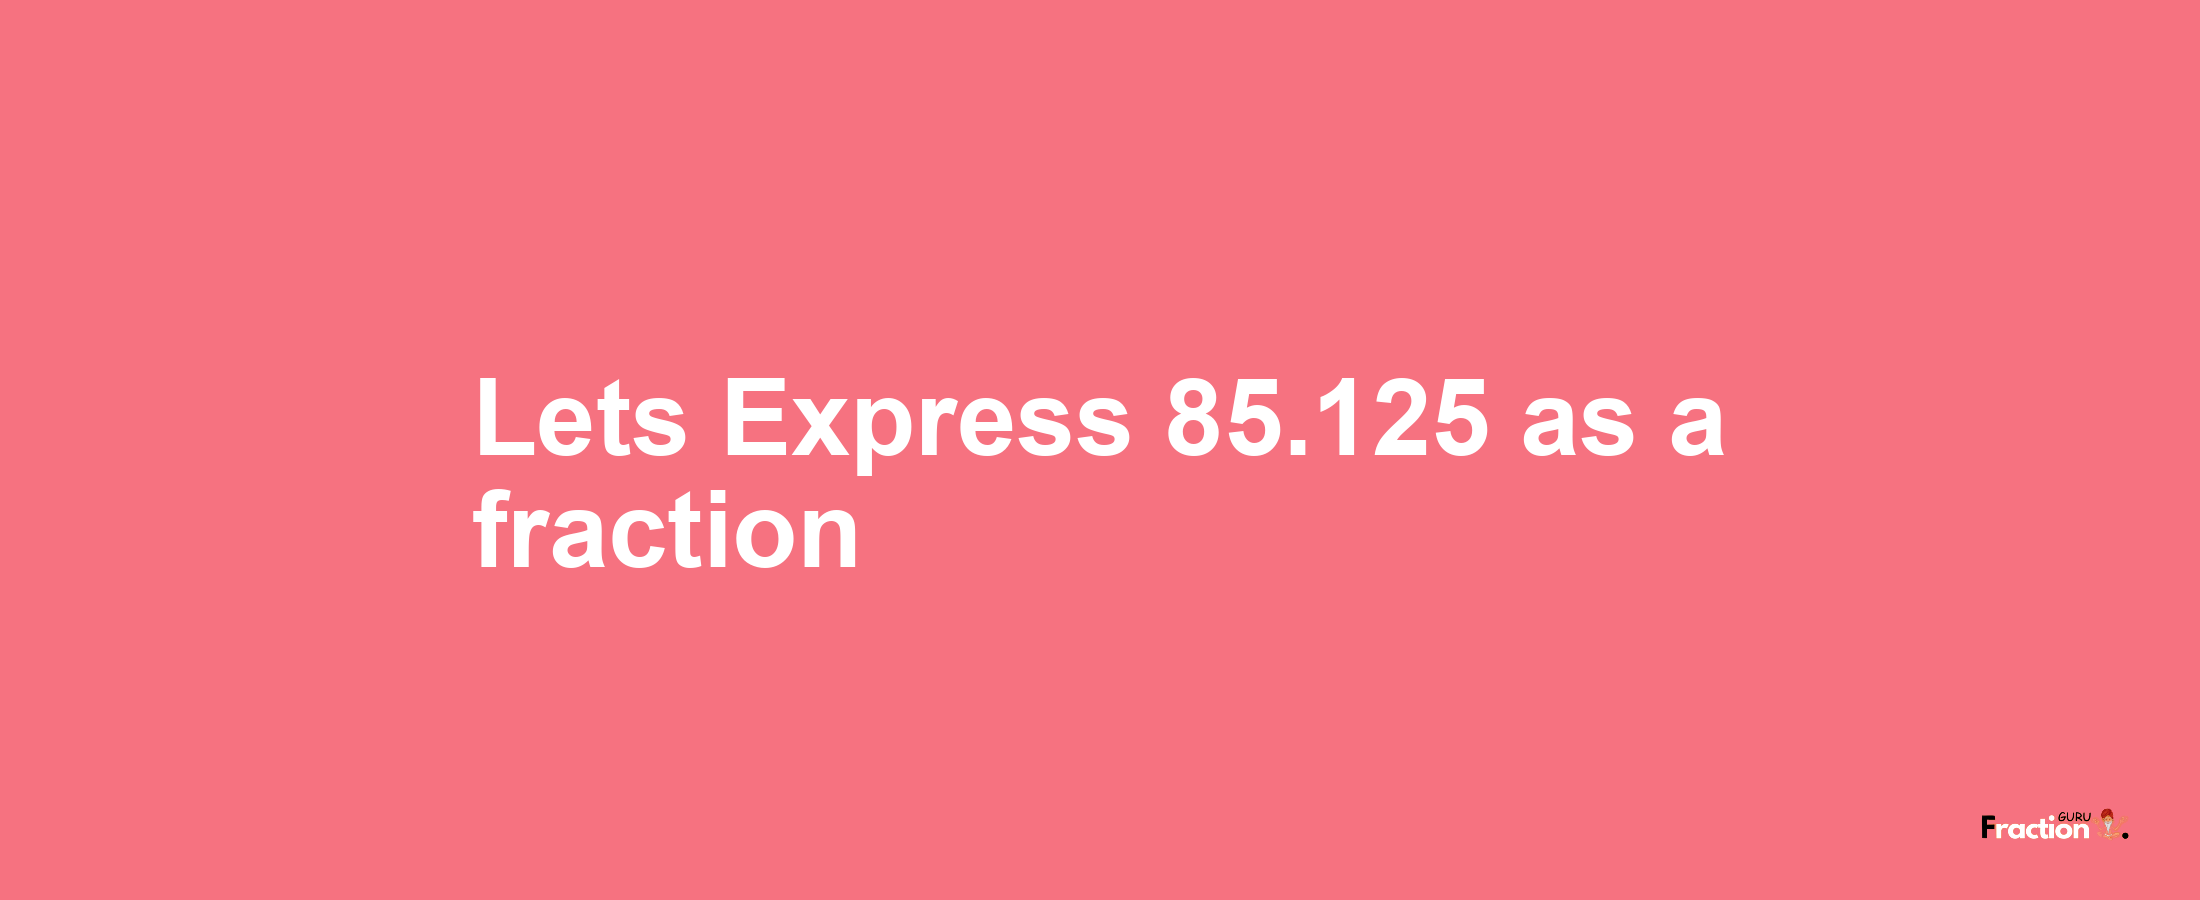 Lets Express 85.125 as afraction